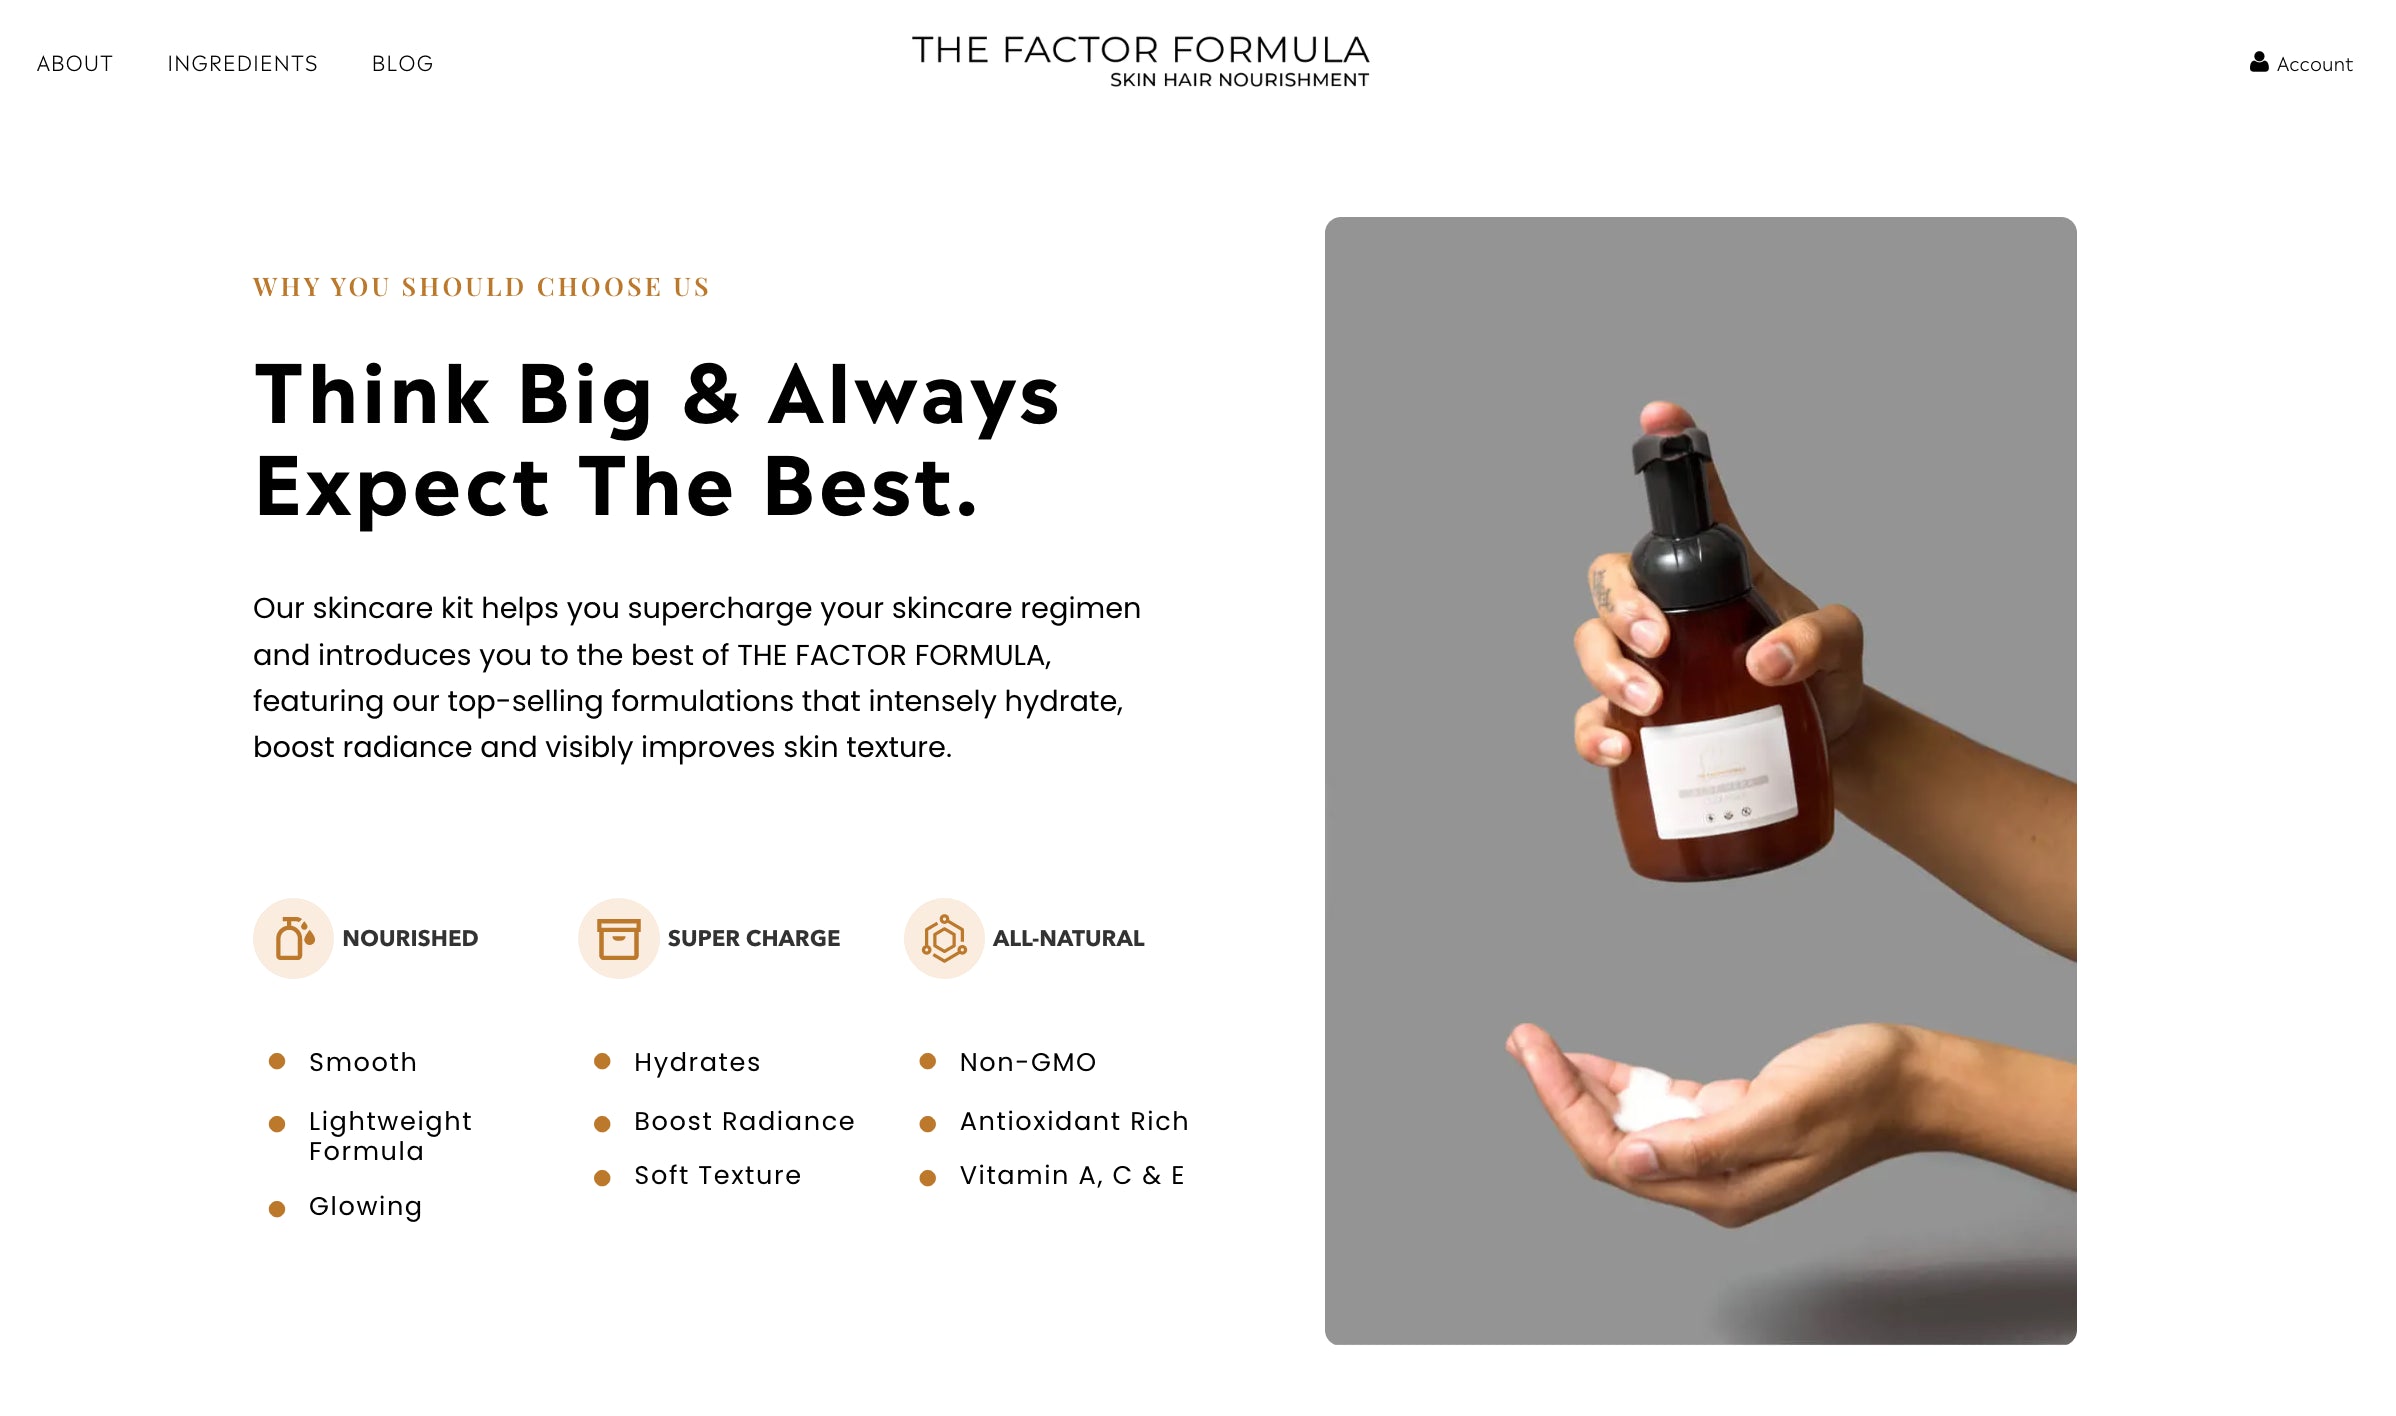 The Factor Formula's landing page